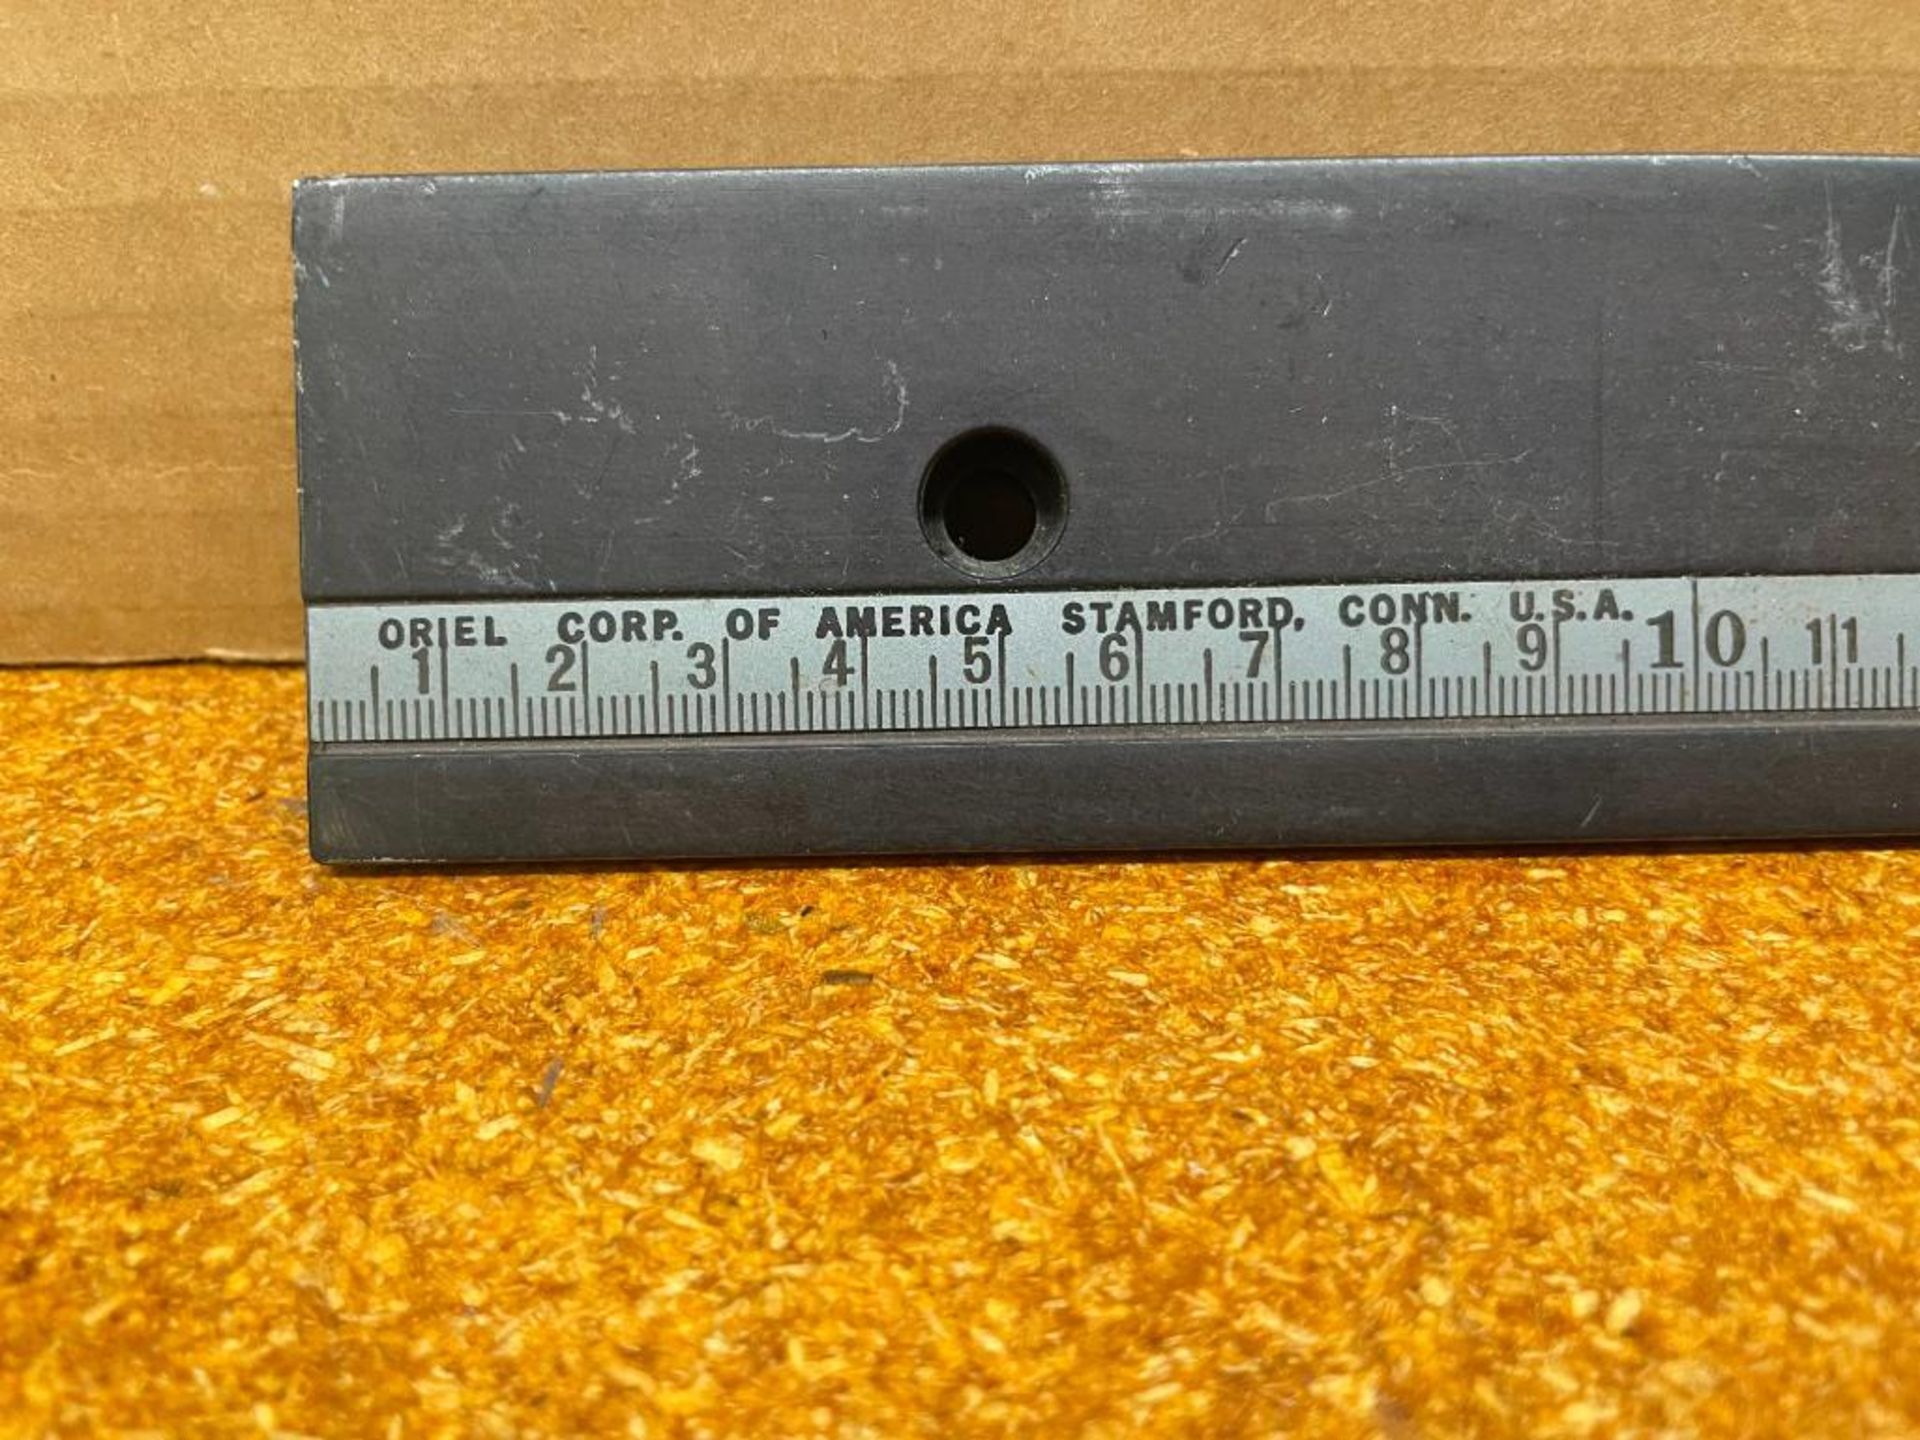 OPTICAL RAIL WITH RULER BRAND/MODEL: ORIEL INFORMATION: 60cm LONG, 5-COUNTERSUNK HOLES QTY: 1 - Image 4 of 4